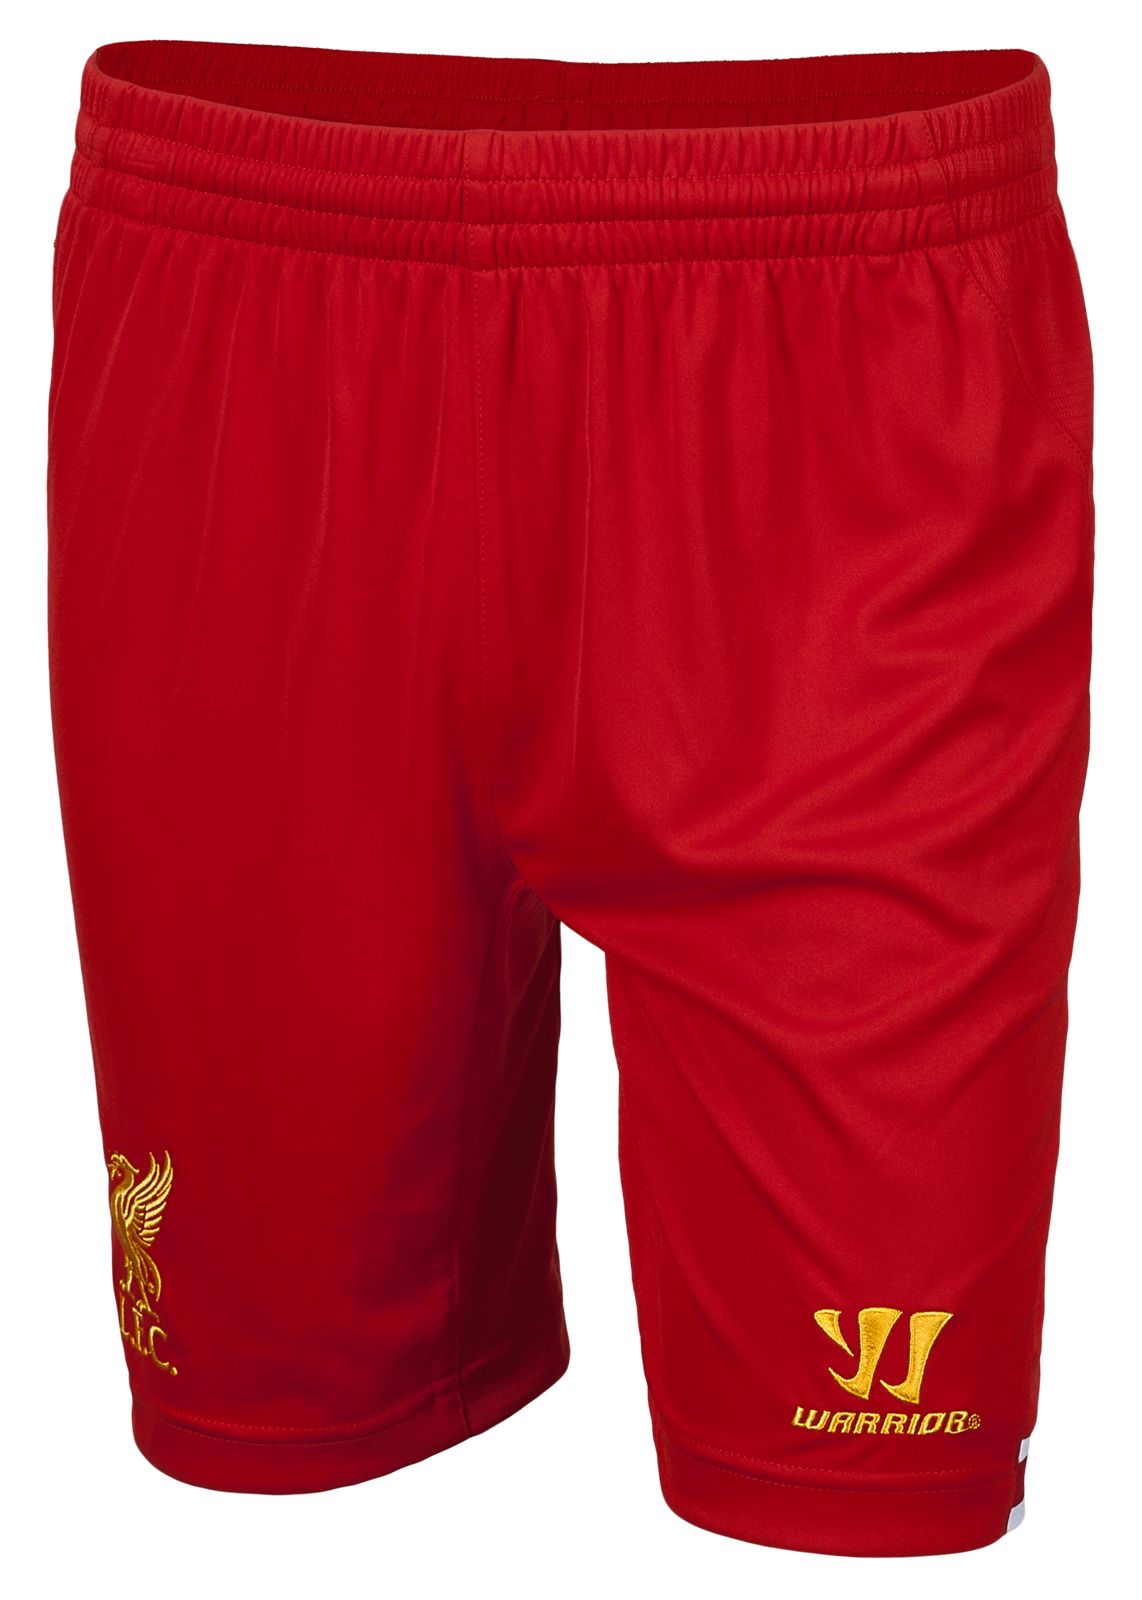 Liverpool Home Junior Short 2013/14, High Risk Red with White & Amber Yellow image number 1